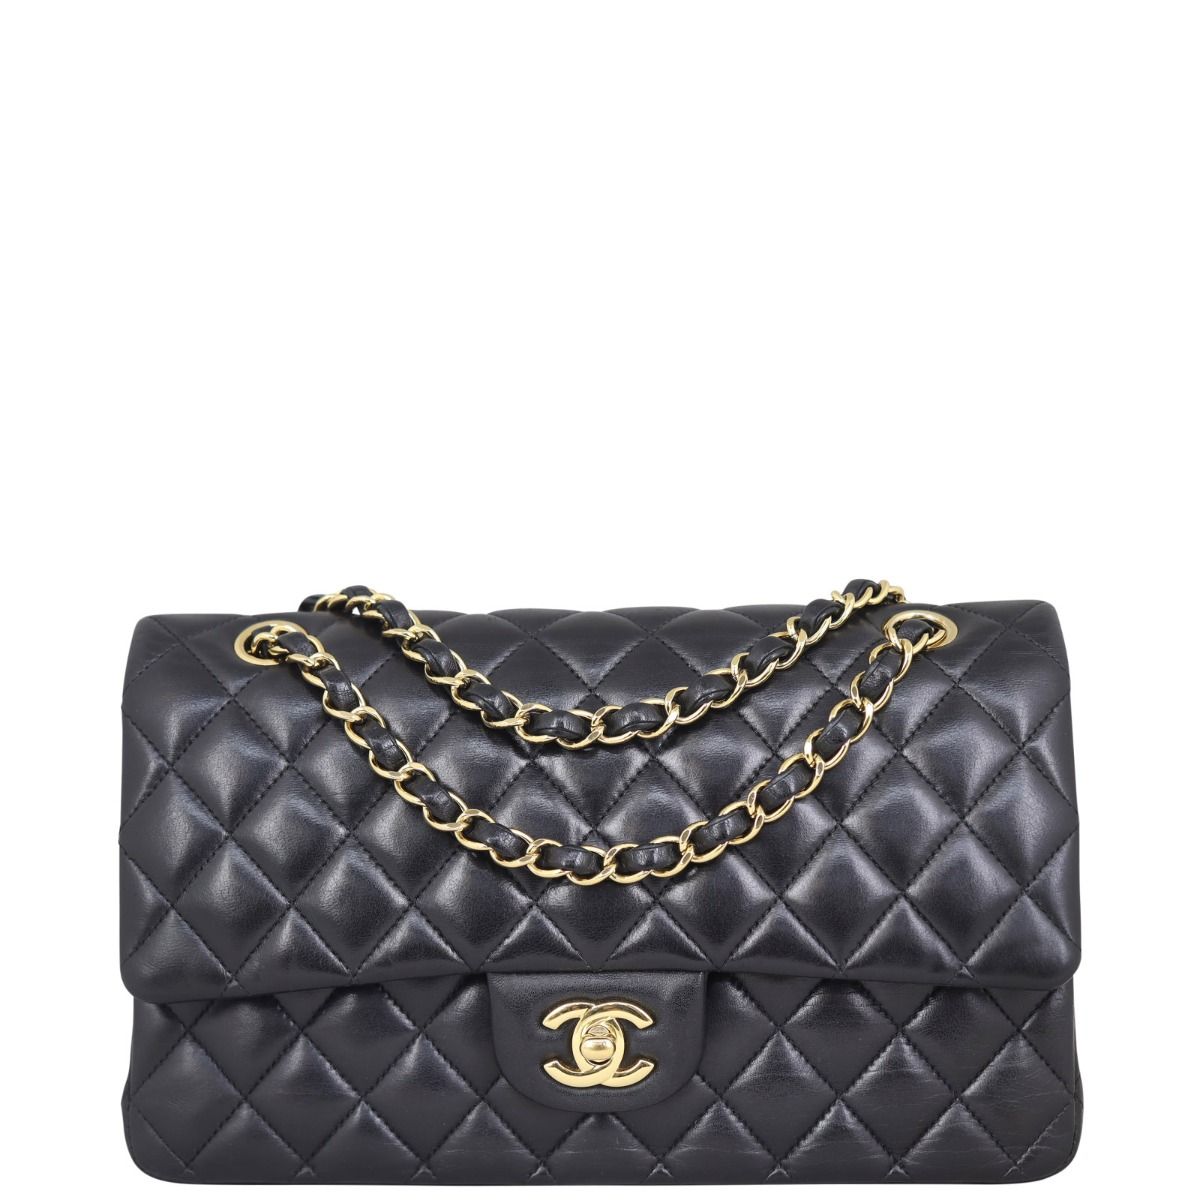 Chanel Classic Flap Repair The Restory Aftercare For Luxury Fashion